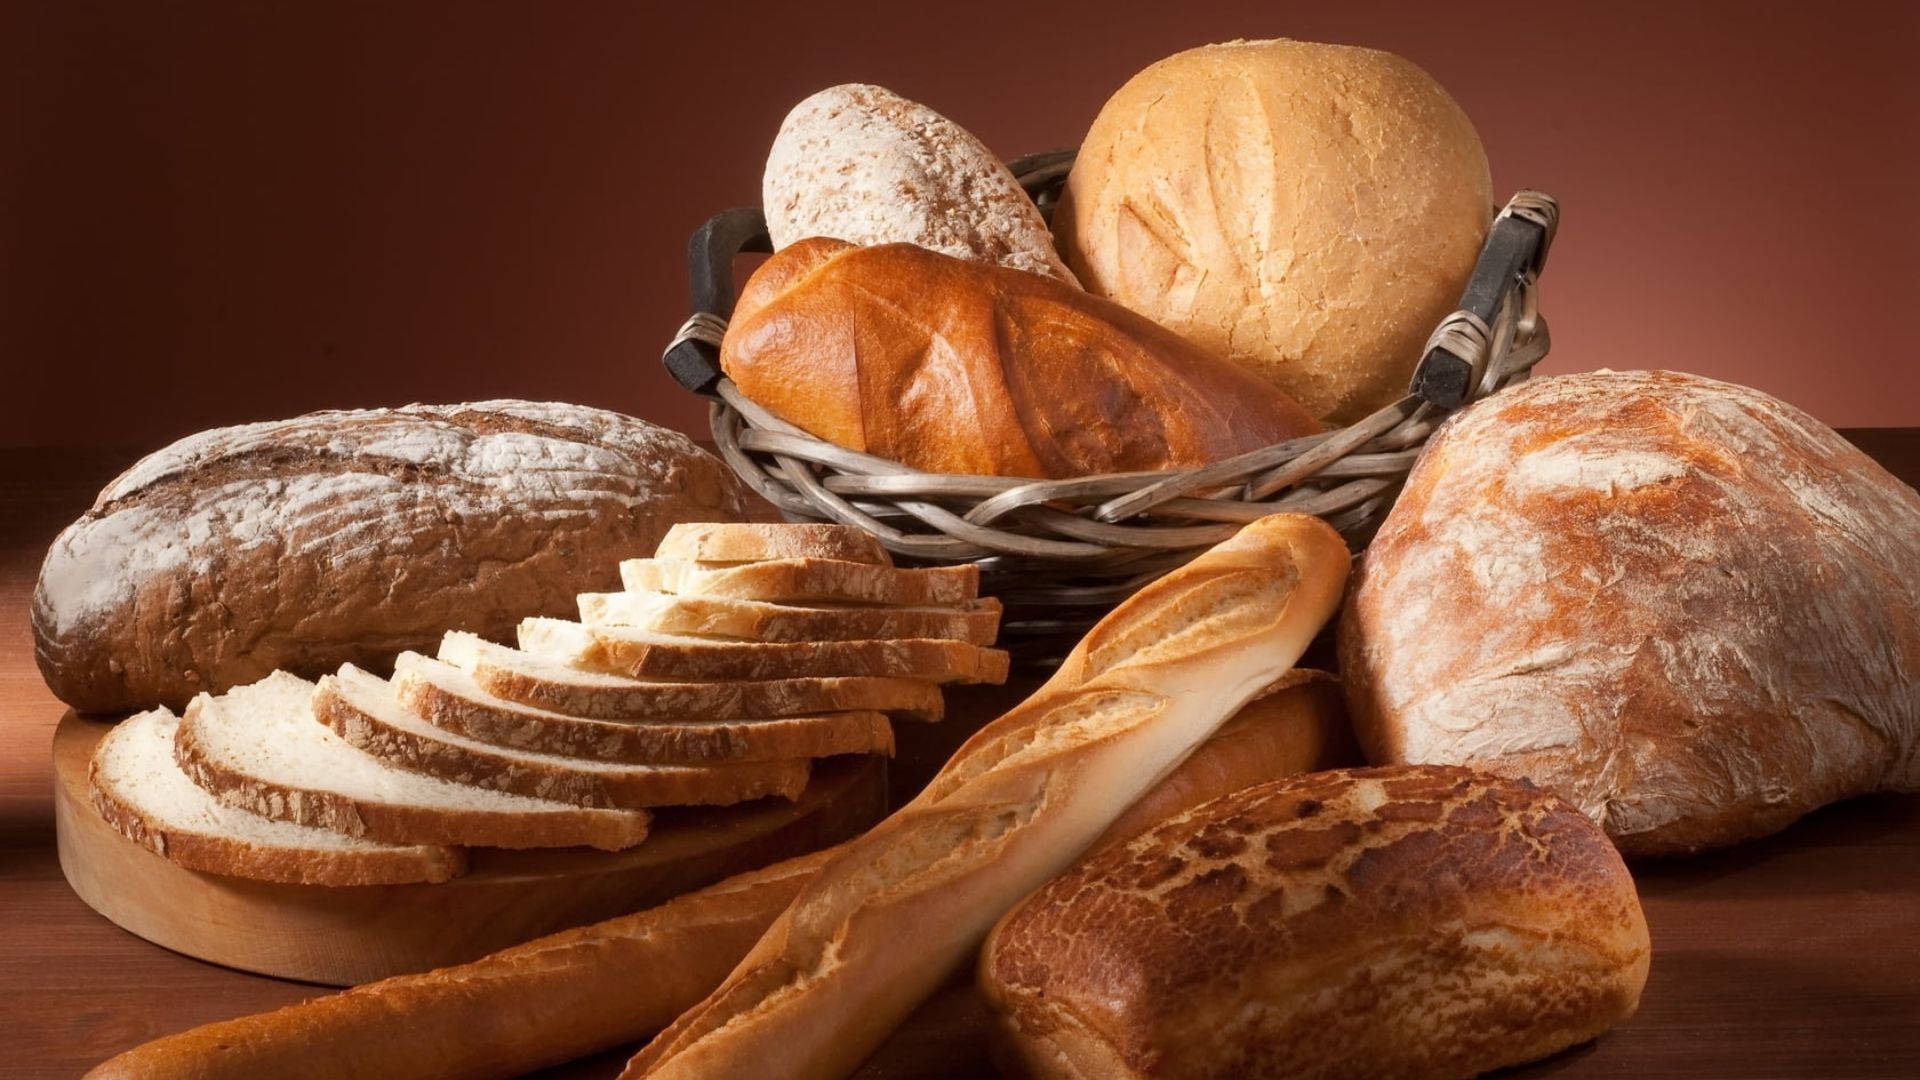 Assortment of breads in a stylish maroon room Wallpaper